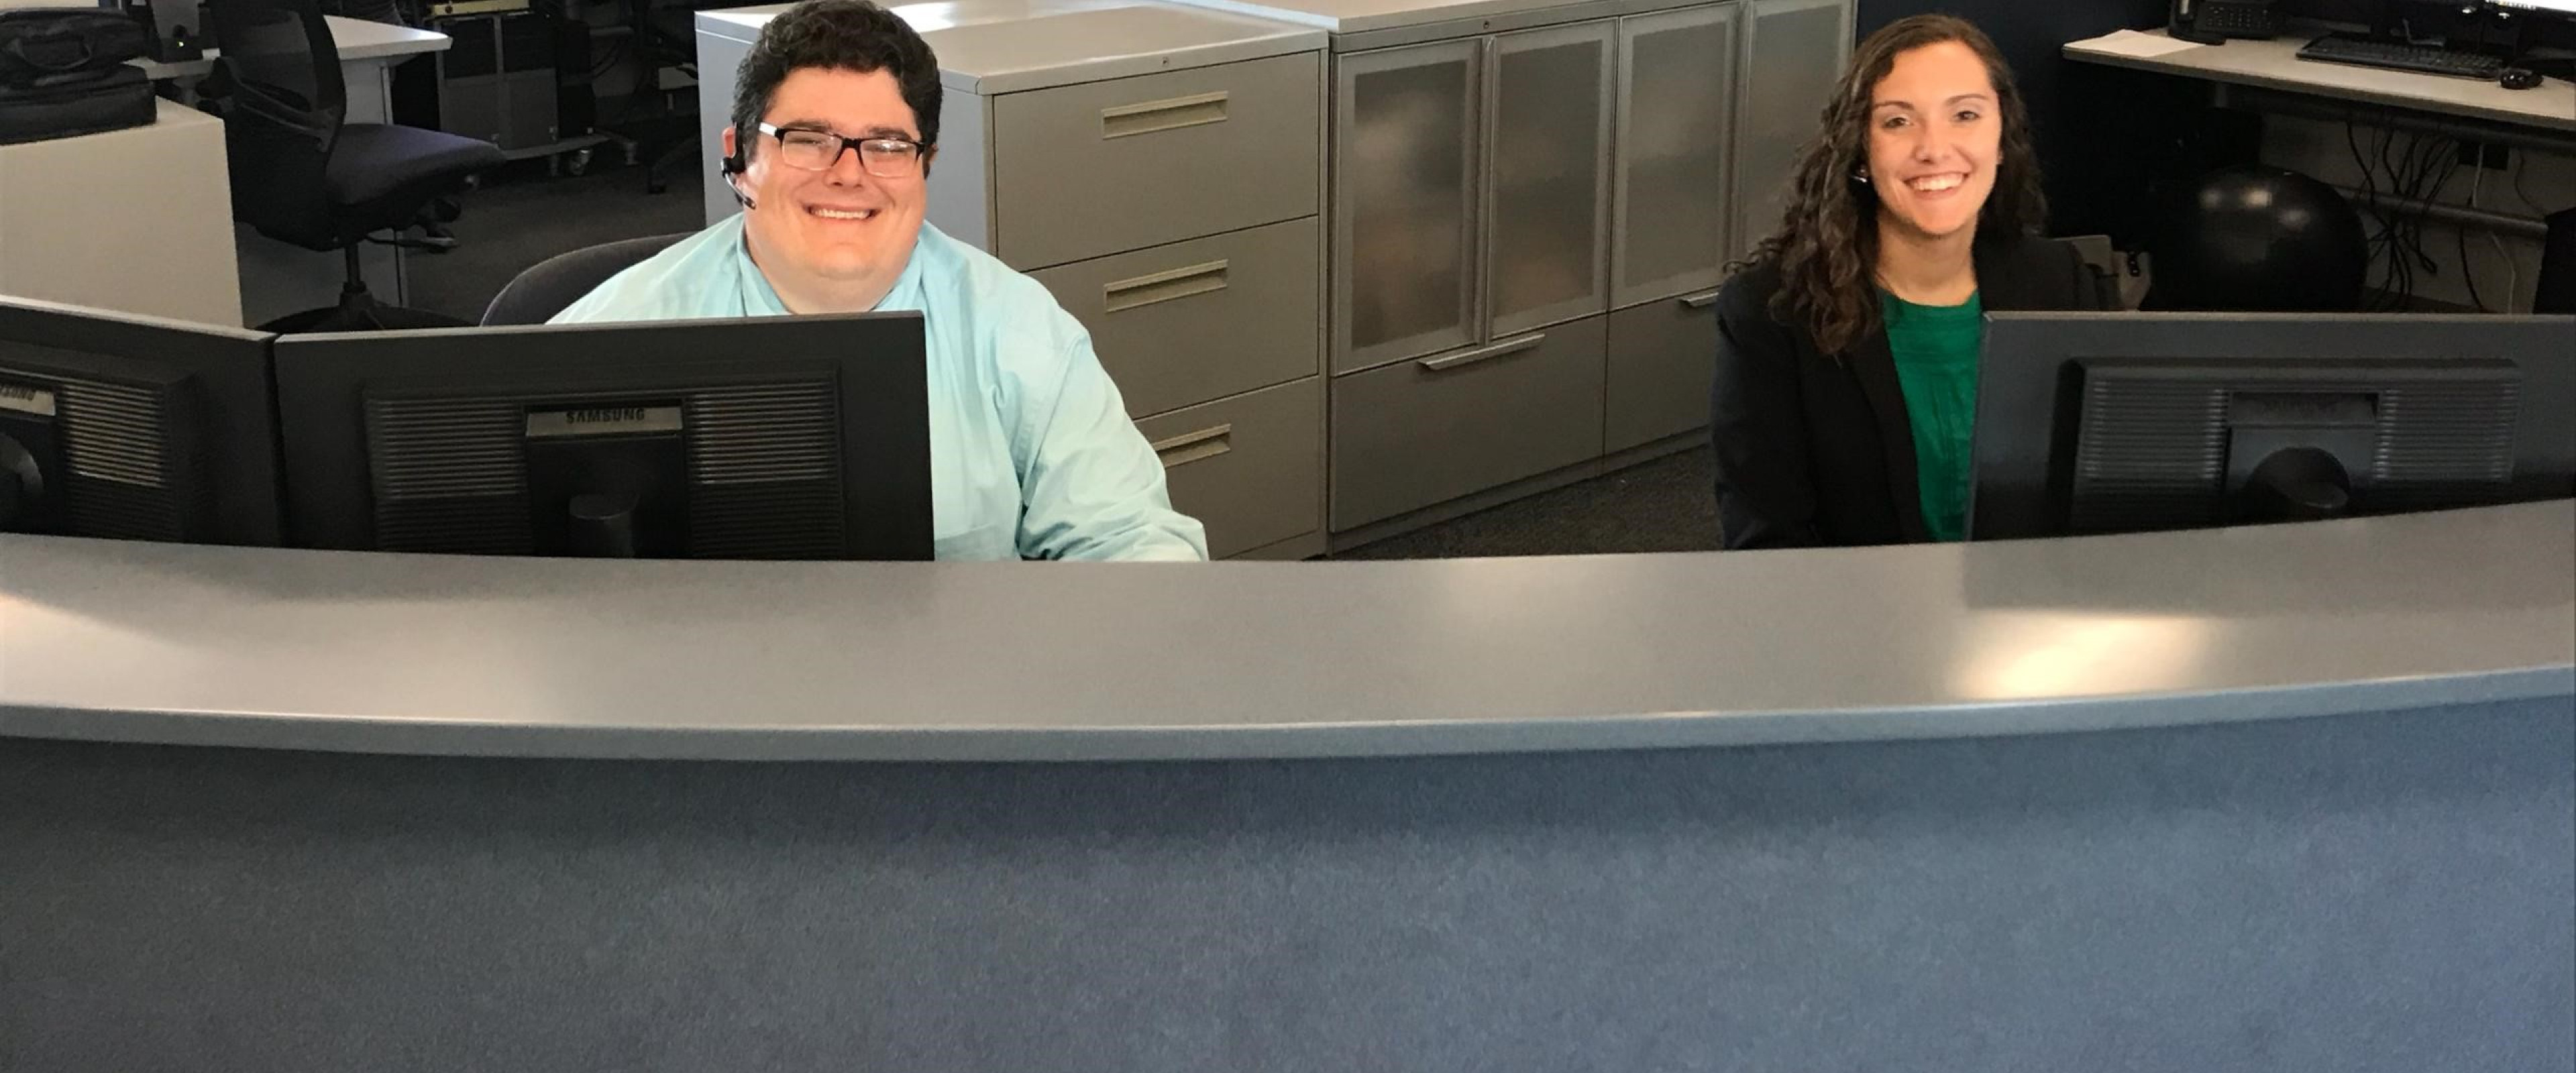 Two employees sit at a desk behind computers with cabinets and more computers behind them